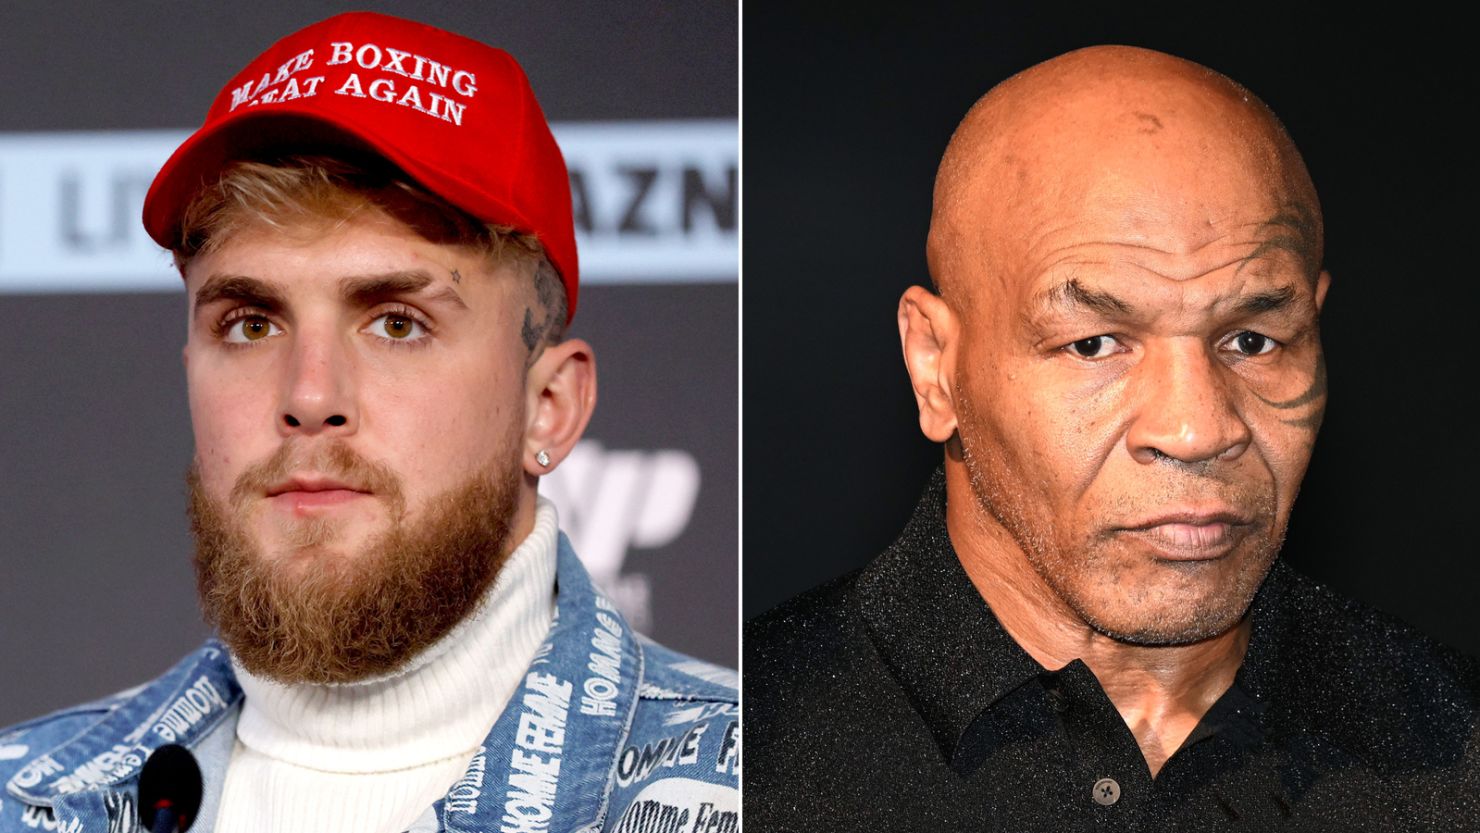 Jake Paul to face boxing legend Mike Tyson in July exhibition fight CNN